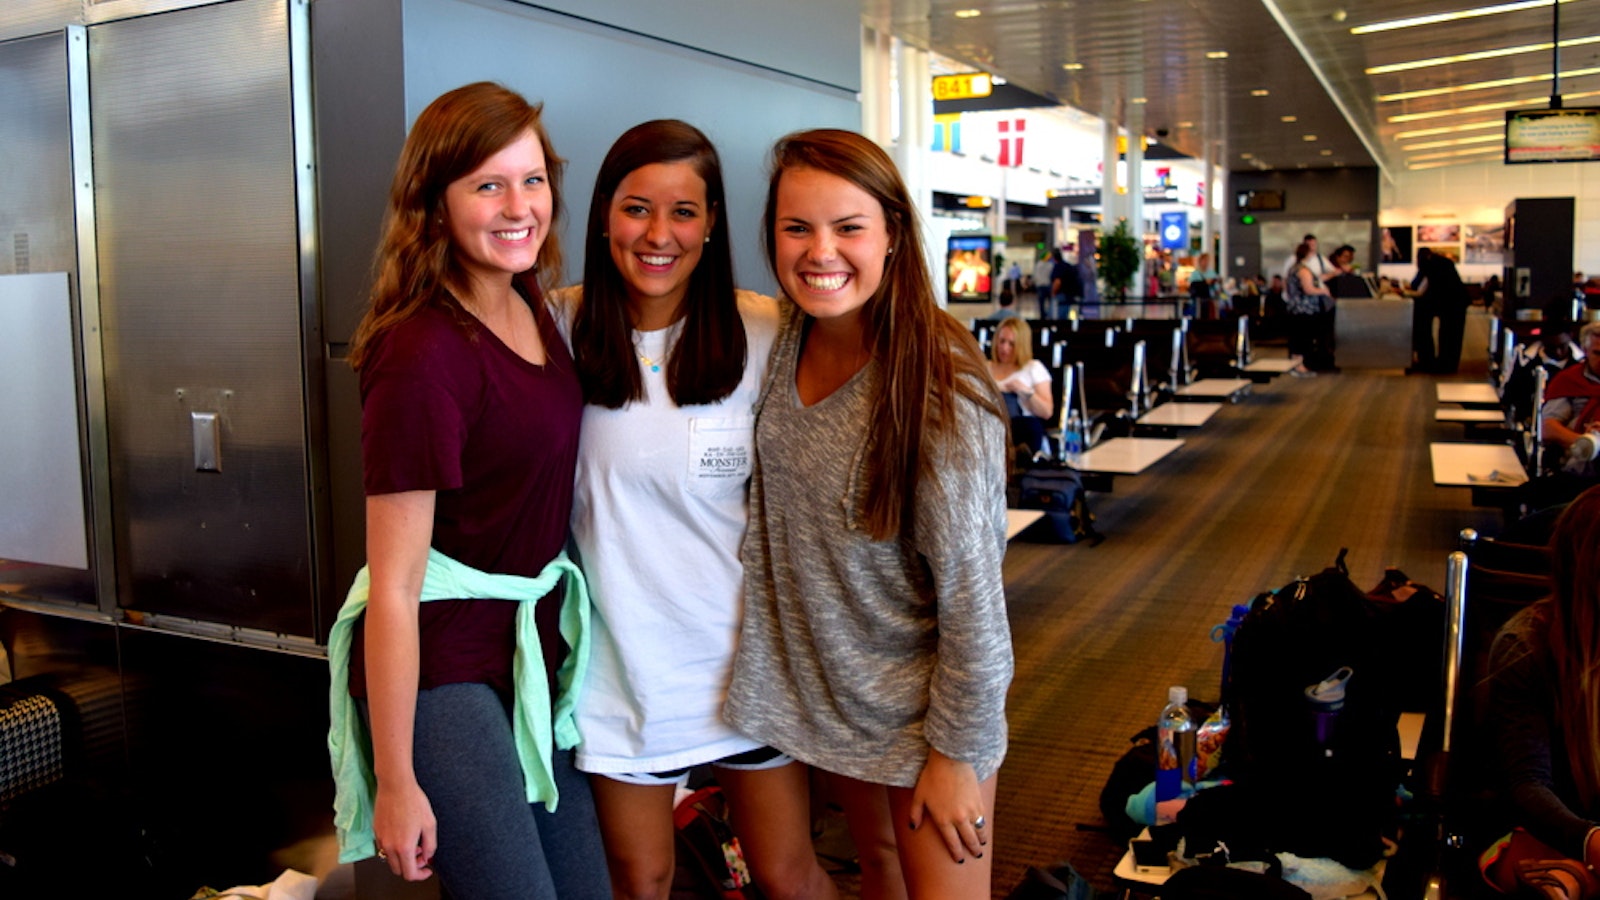 Students at the airport